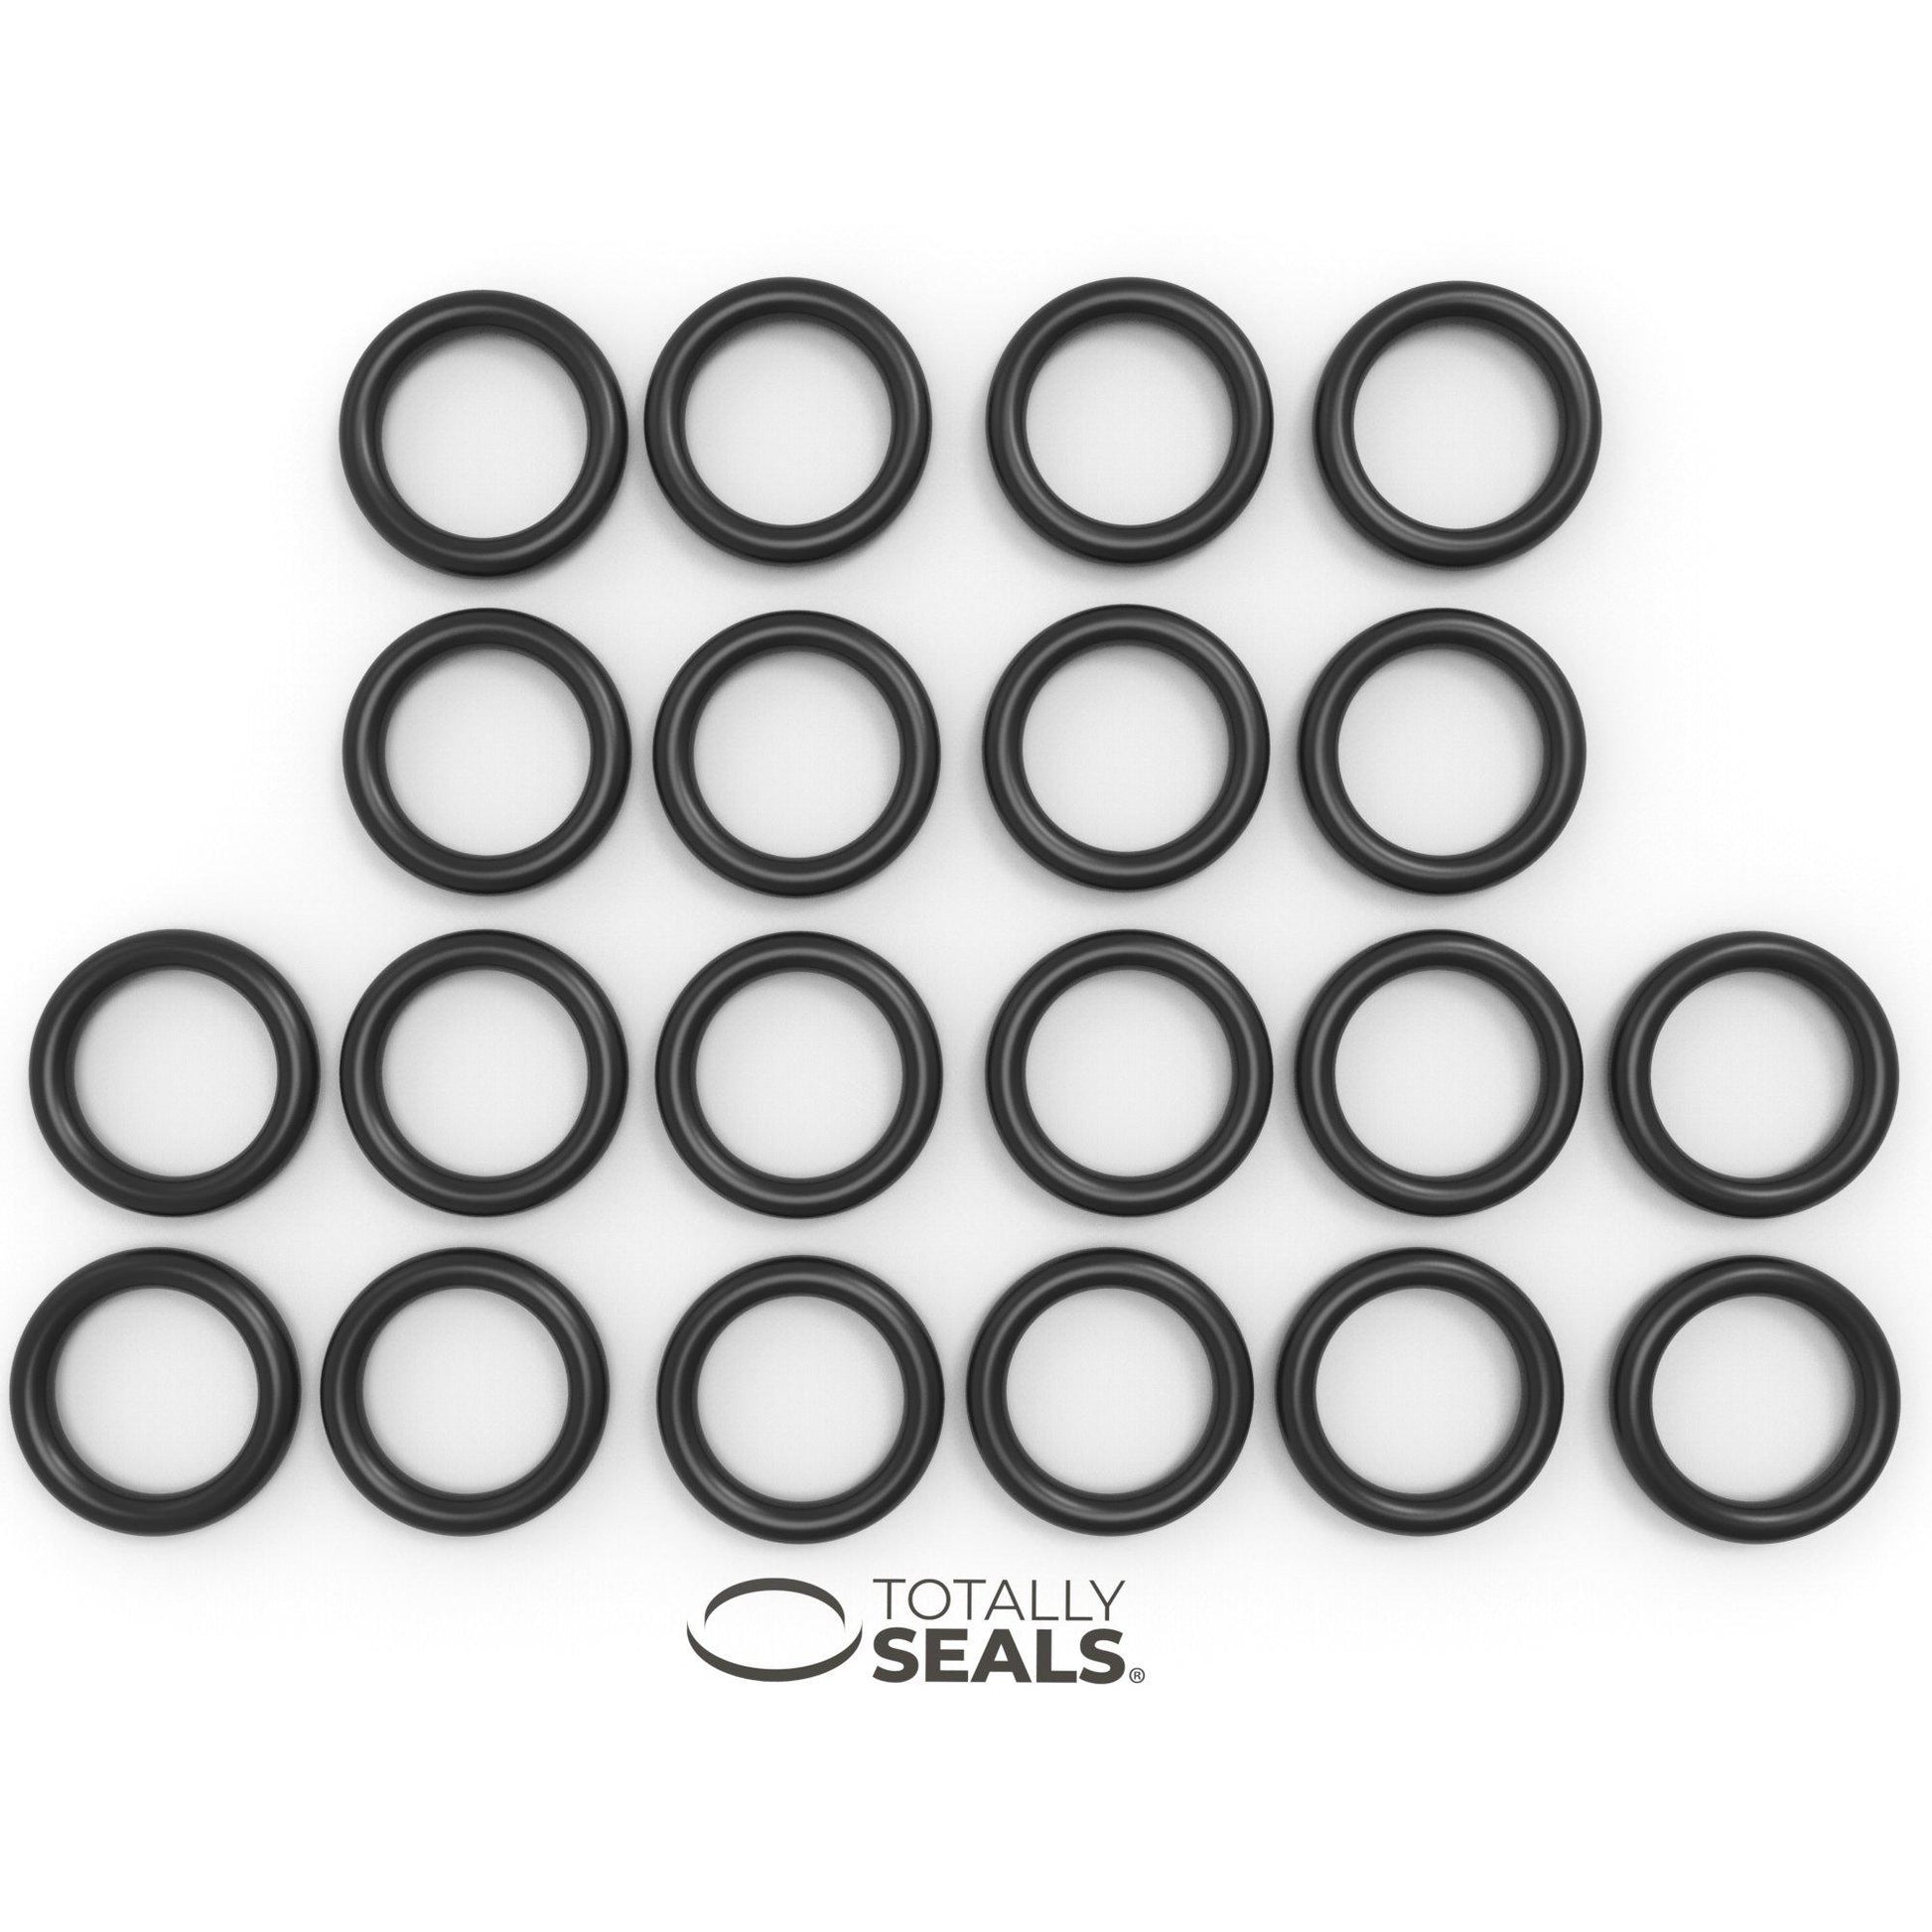 38mm x 2mm (42mm OD) Nitrile O-Rings - Totally Seals®